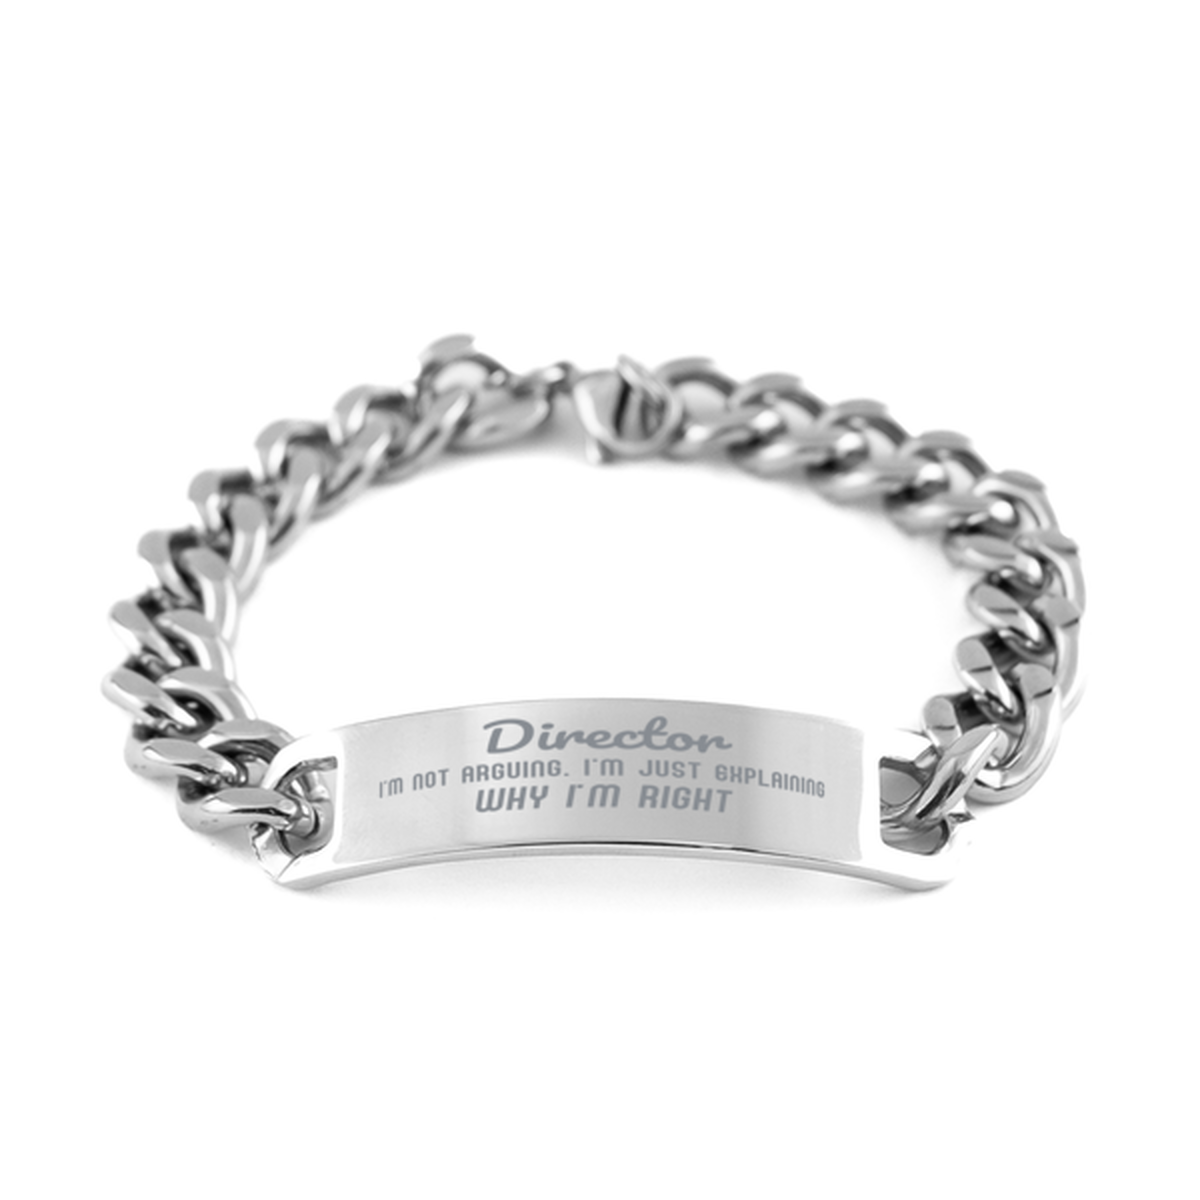 Director I'm not Arguing. I'm Just Explaining Why I'm RIGHT Cuban Chain Stainless Steel Bracelet, Graduation Birthday Christmas Director Gifts For Director Funny Saying Quote Present for Men Women Coworker